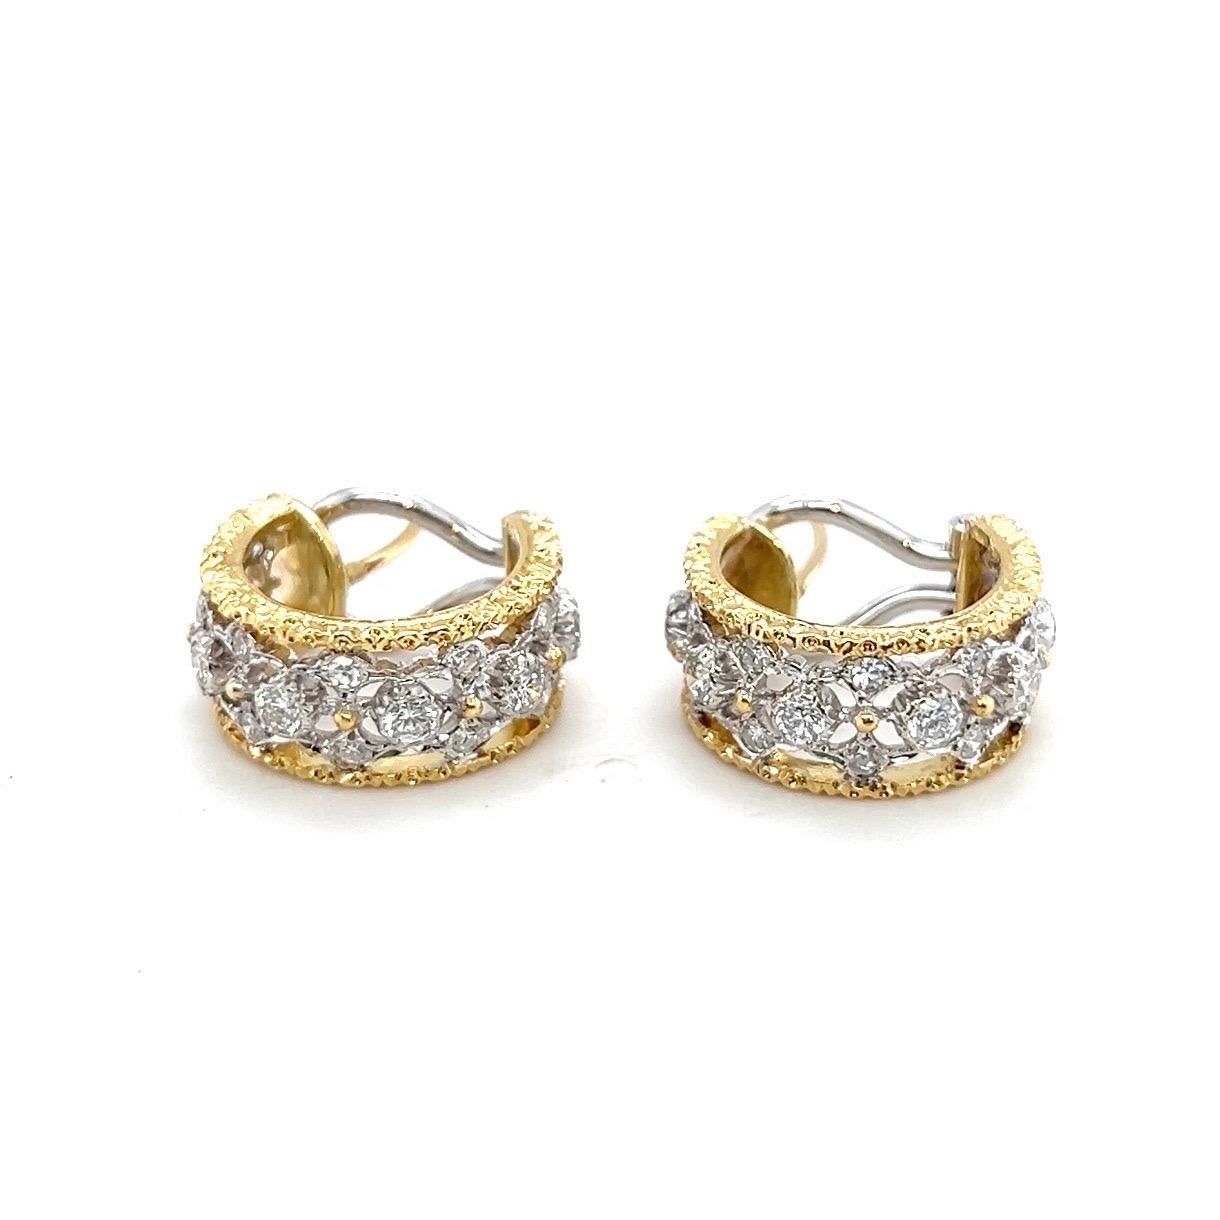 Elegant and feminine 18 karat gold and diamond hoop earrings by Italian artist jeweler Mario Buccellati.

Filigree bicolour hoop earrings masterfully crafted in 18 karat white and yellow gold. The open work front is set with brilliant- and